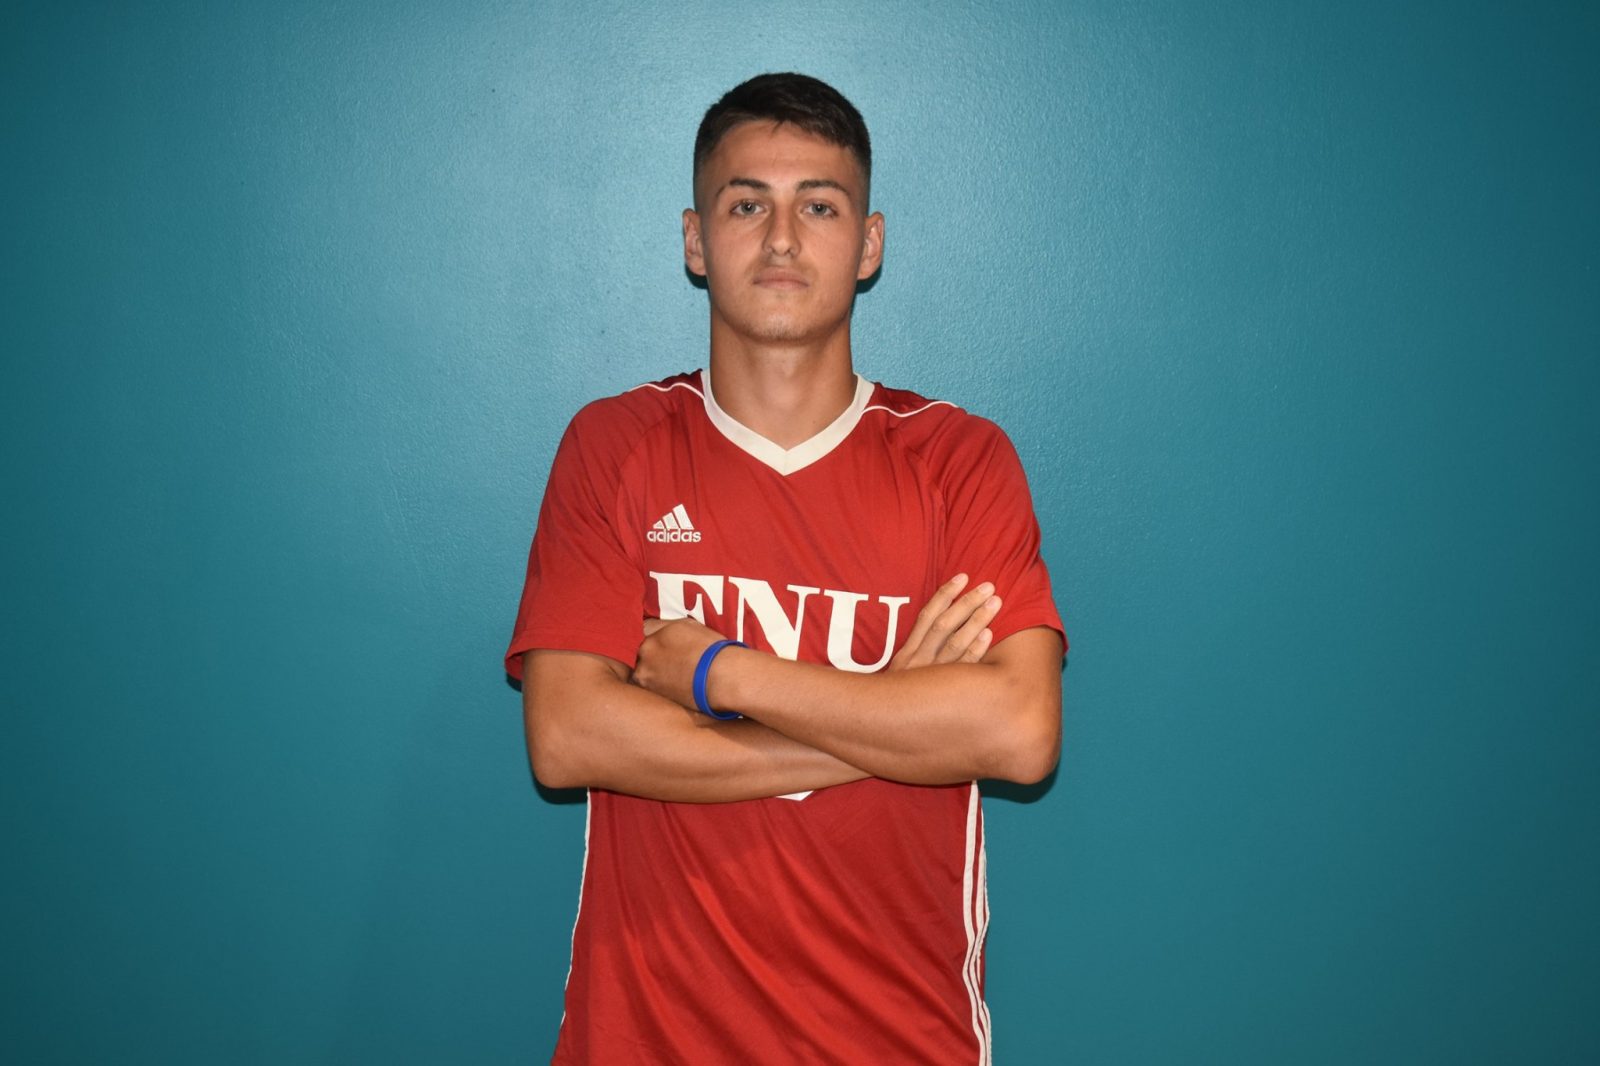 FNU soccer player with arms crossed